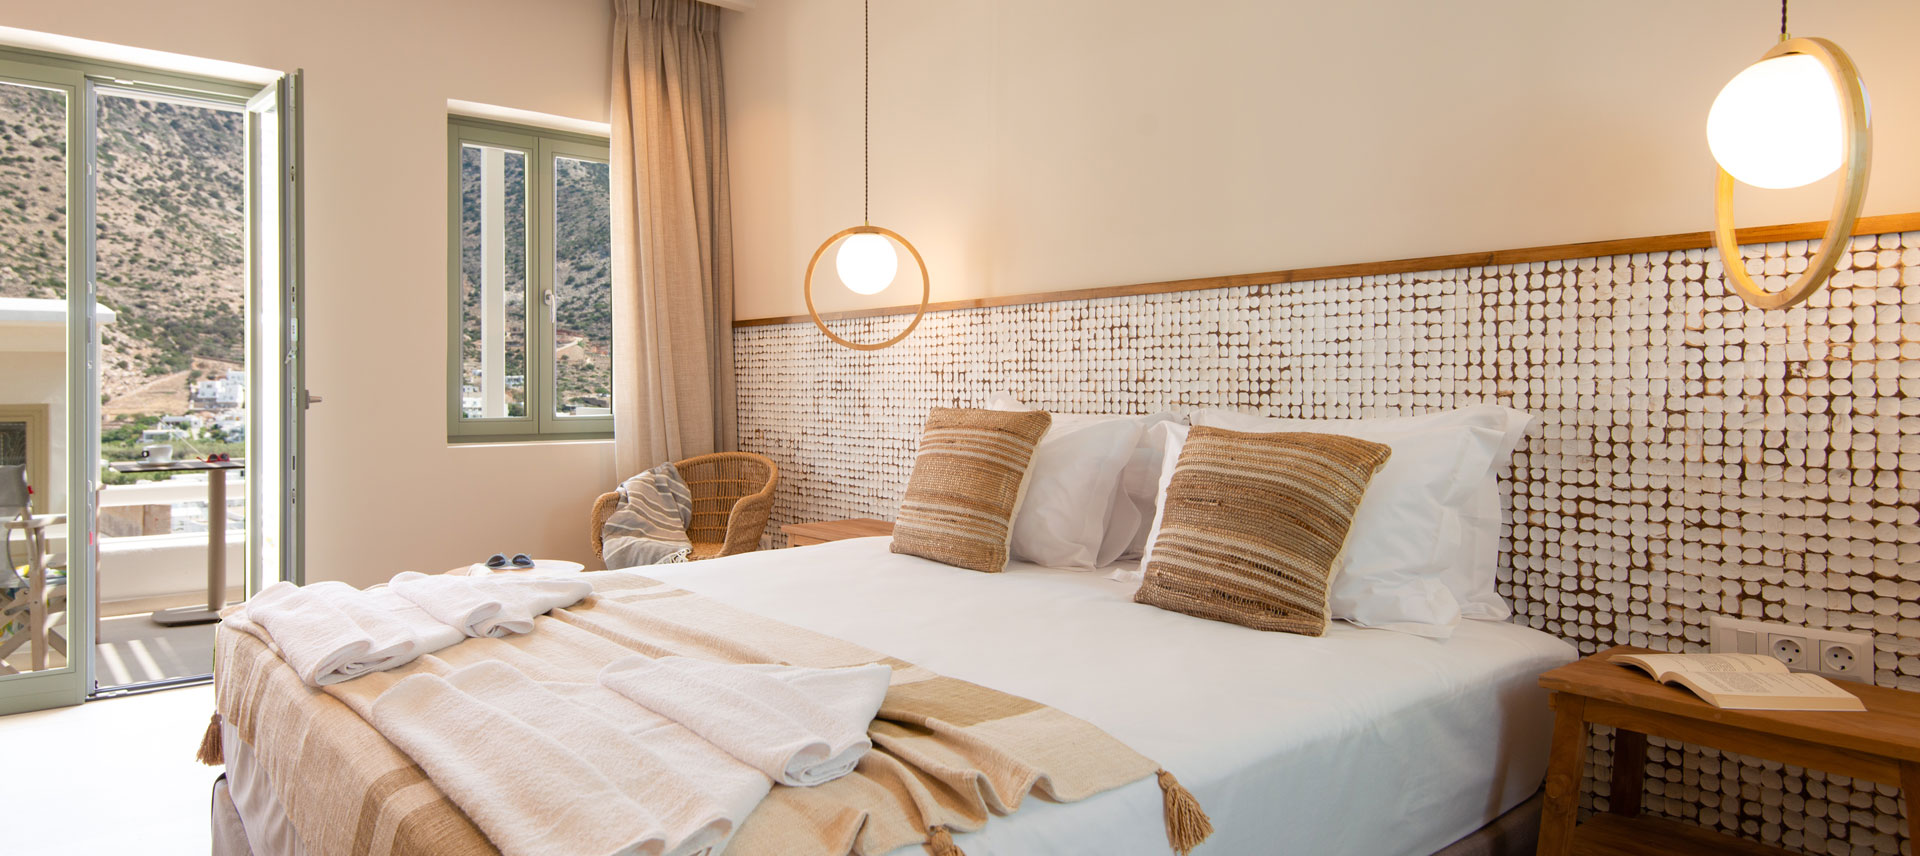 Chambres doubles chez Sunlight Superior hospitality à Sifnos